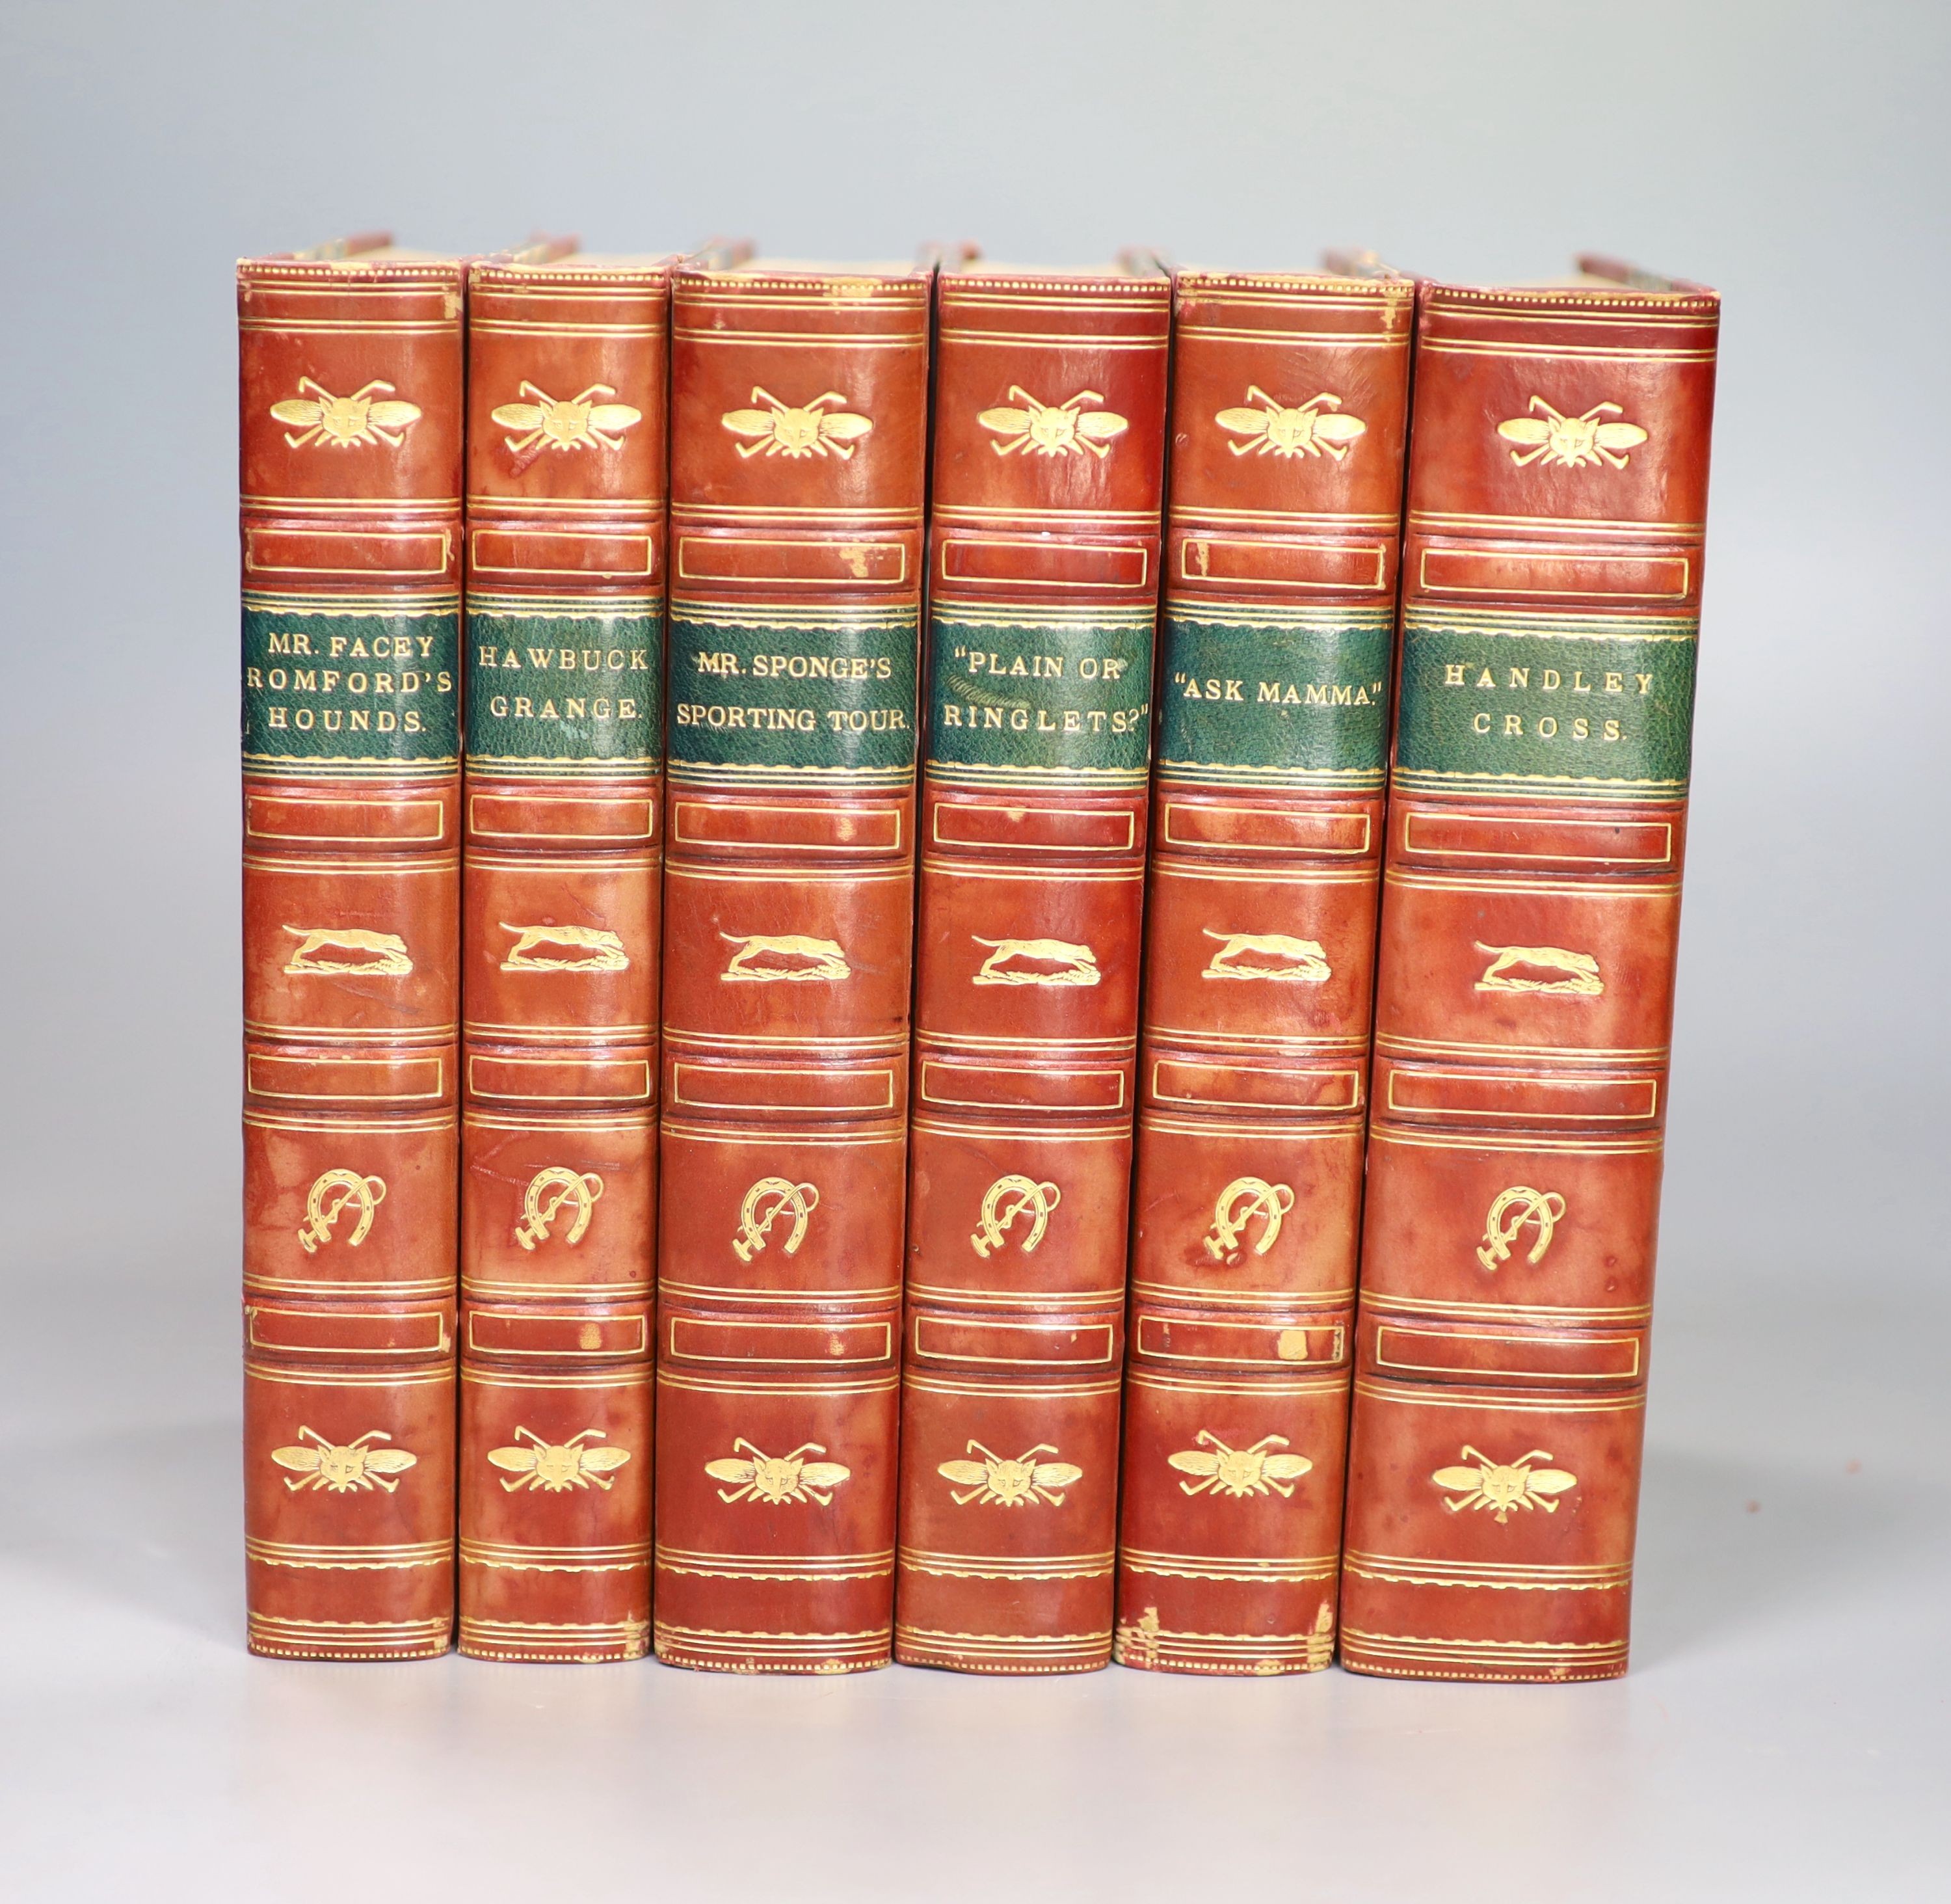 Surtees, Robert Smith - The ‘’Jorrocks’’ edition, 6 vols, 8vo, illustrated by John Leech, consisting of, Handley Cross, Mr. Facey Romford’s Hounds, Hawbuck Grange, Mr. Sponge’s Sporting Tour, ‘’Plain or Ringlets’’ and ‘’